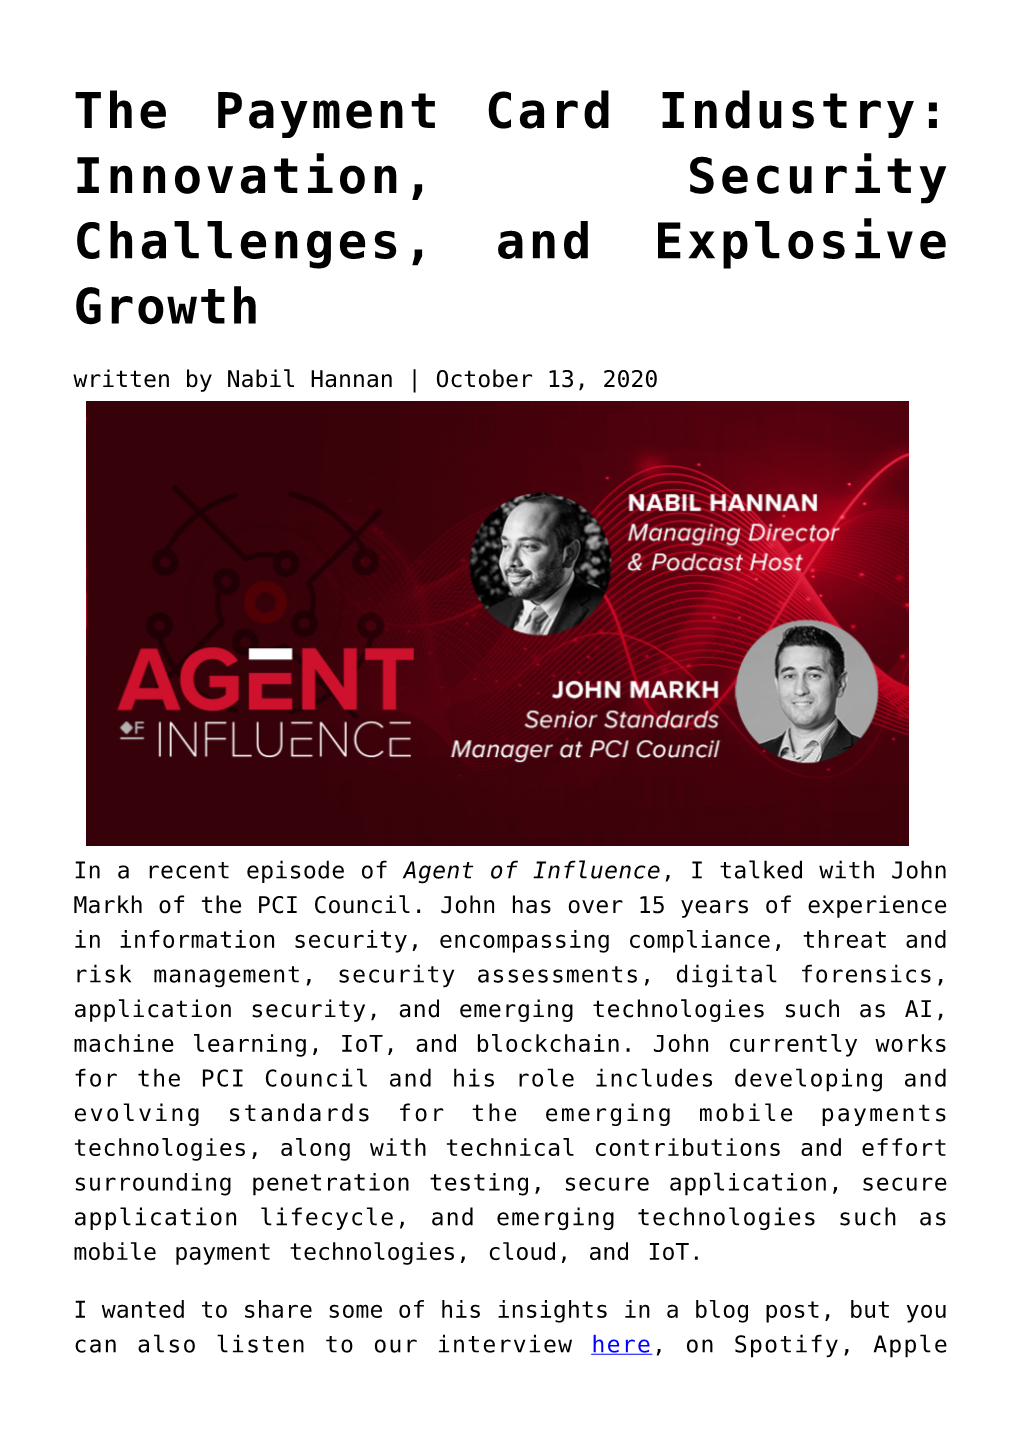 The Payment Card Industry: Innovation, Security Challenges, and Explosive Growth Written by Nabil Hannan | October 13, 2020